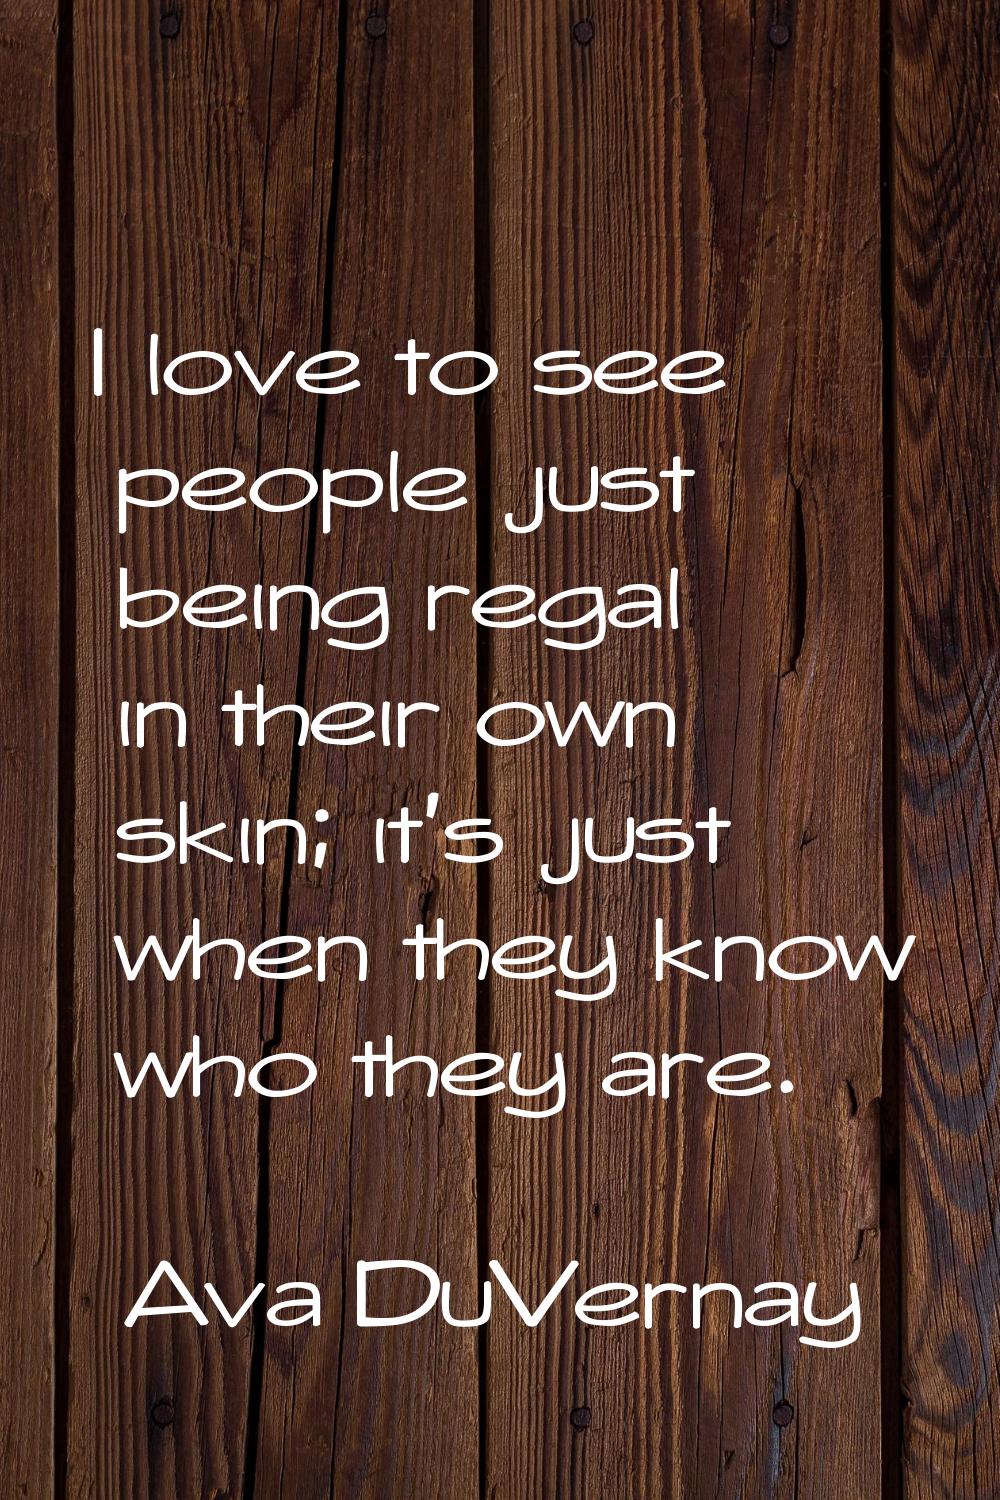 I love to see people just being regal in their own skin; it's just when they know who they are.